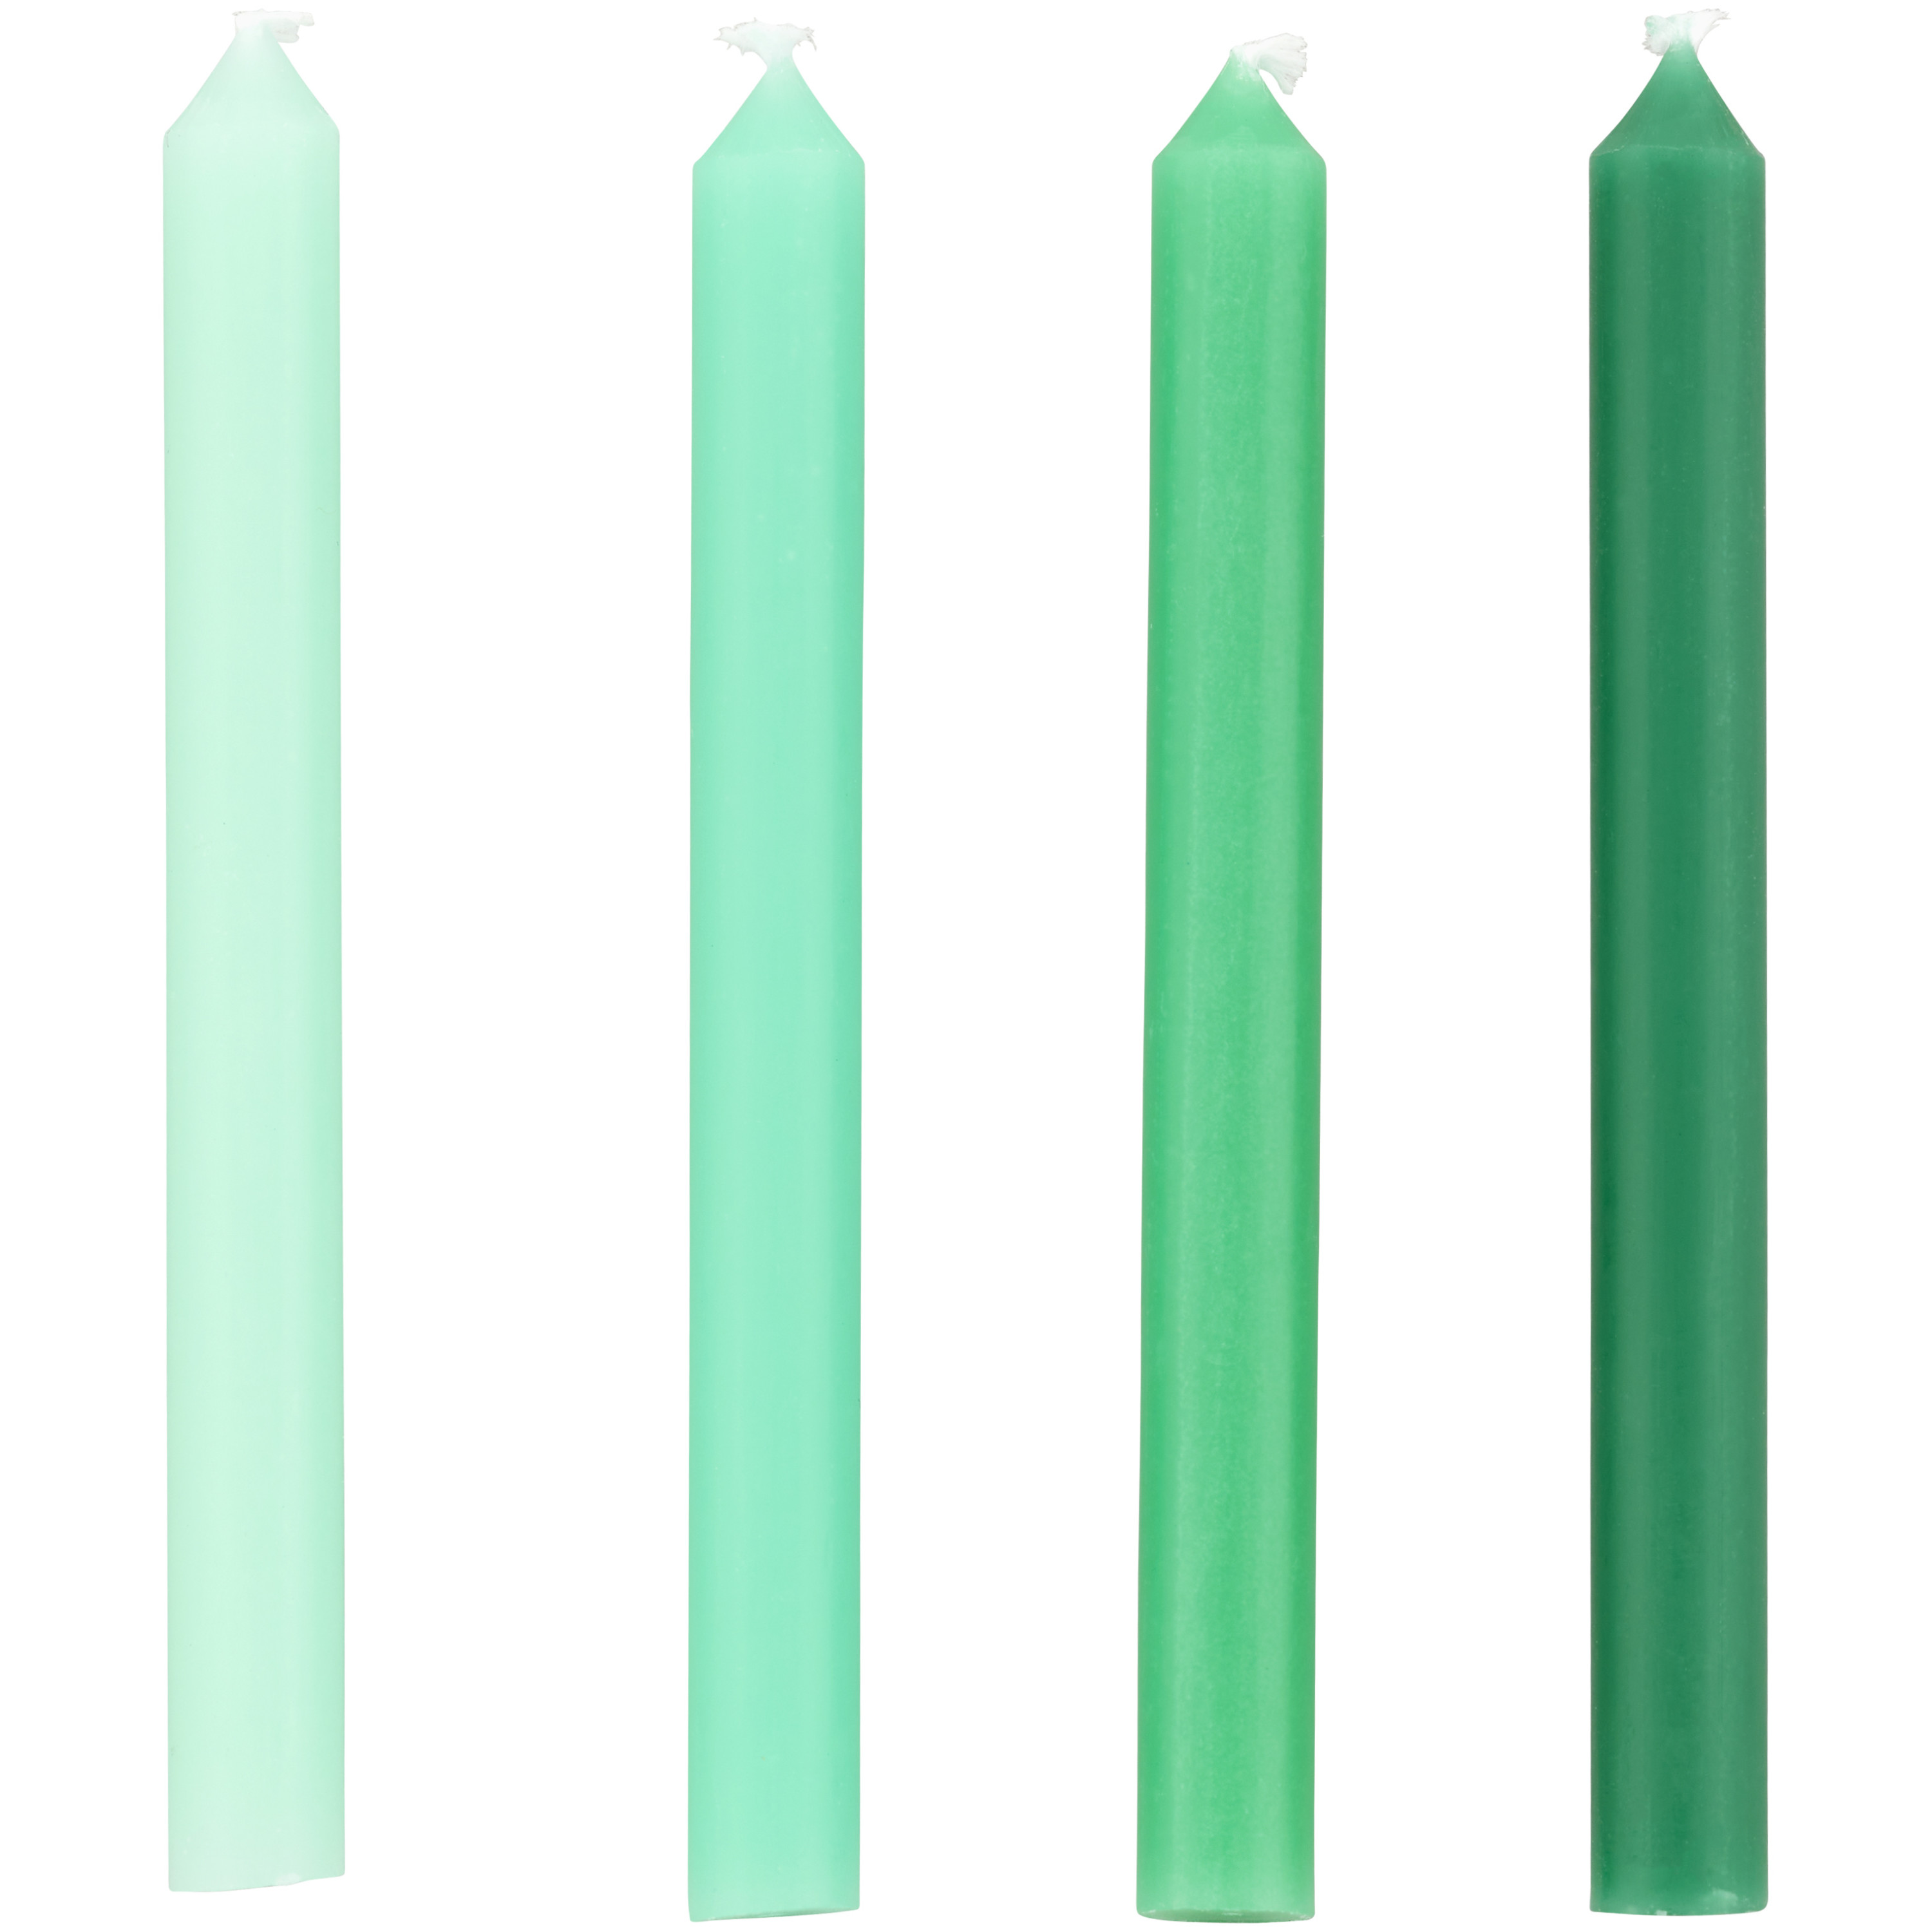 Wilton Light Green, Green and Dark Green Ombre Birthday Candles, 16-Count - image 2 of 4